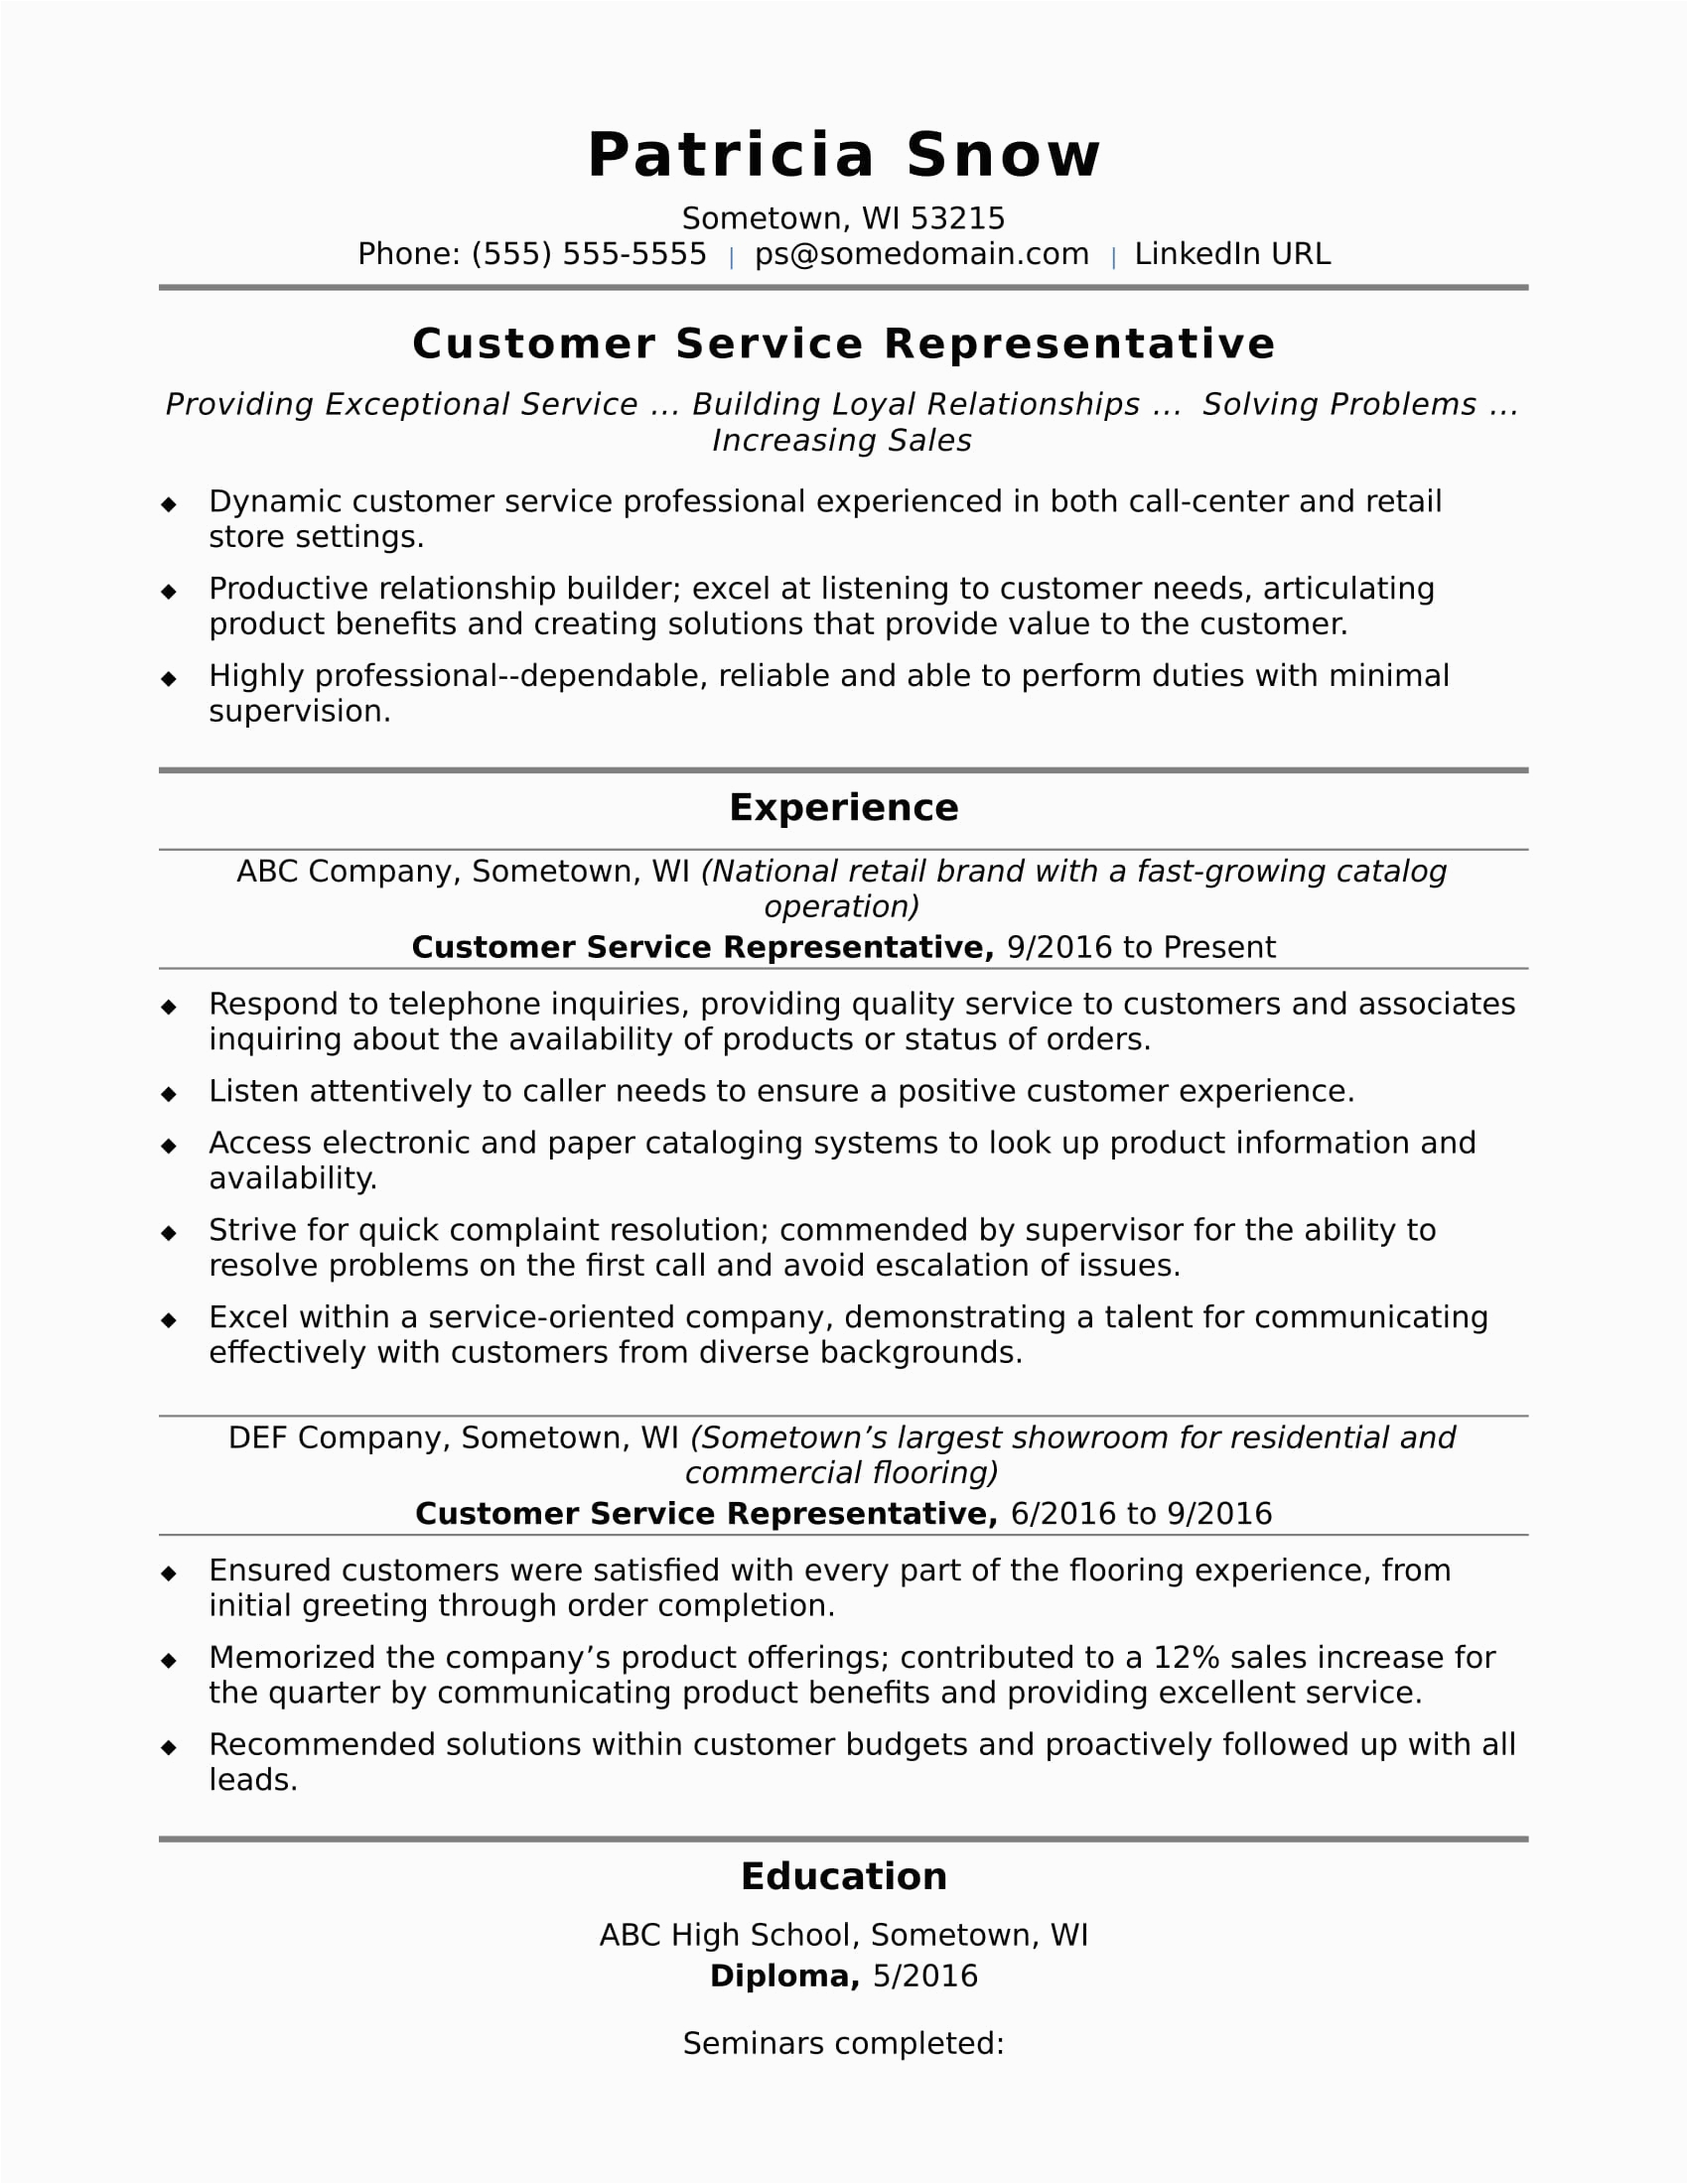 Resume Templates for Customer Service Jobs Customer Service Representative Resume Sample